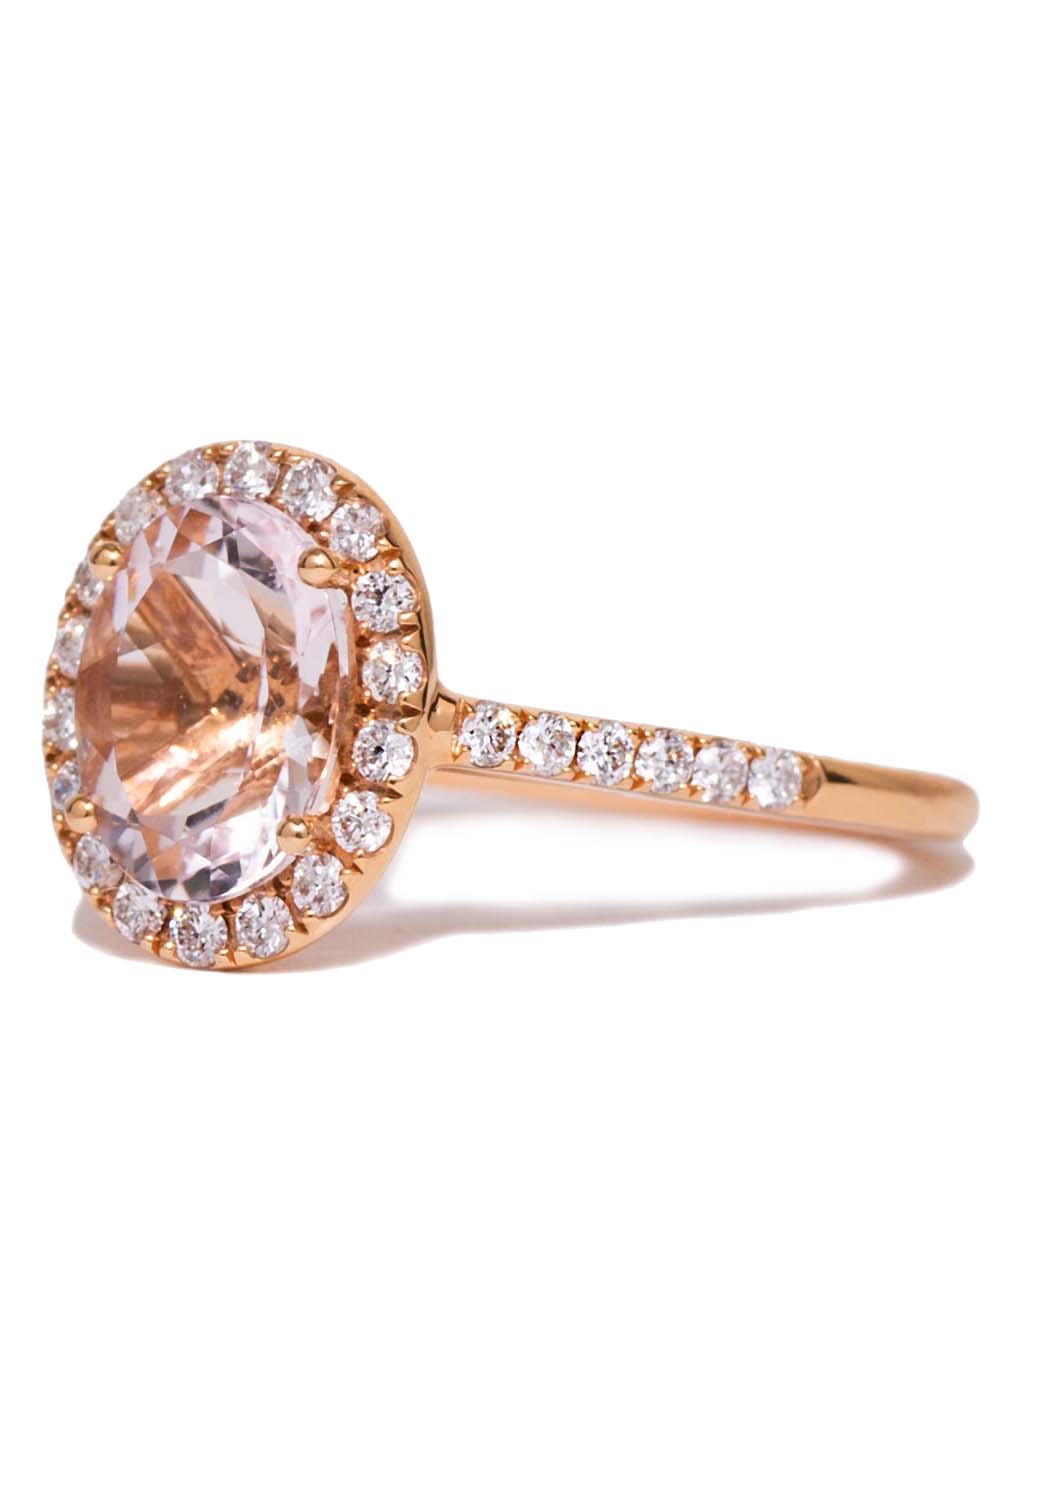 Kimberly Collins Oval Morganite Diamond Rose Gold Ring | OsterJewelers.com